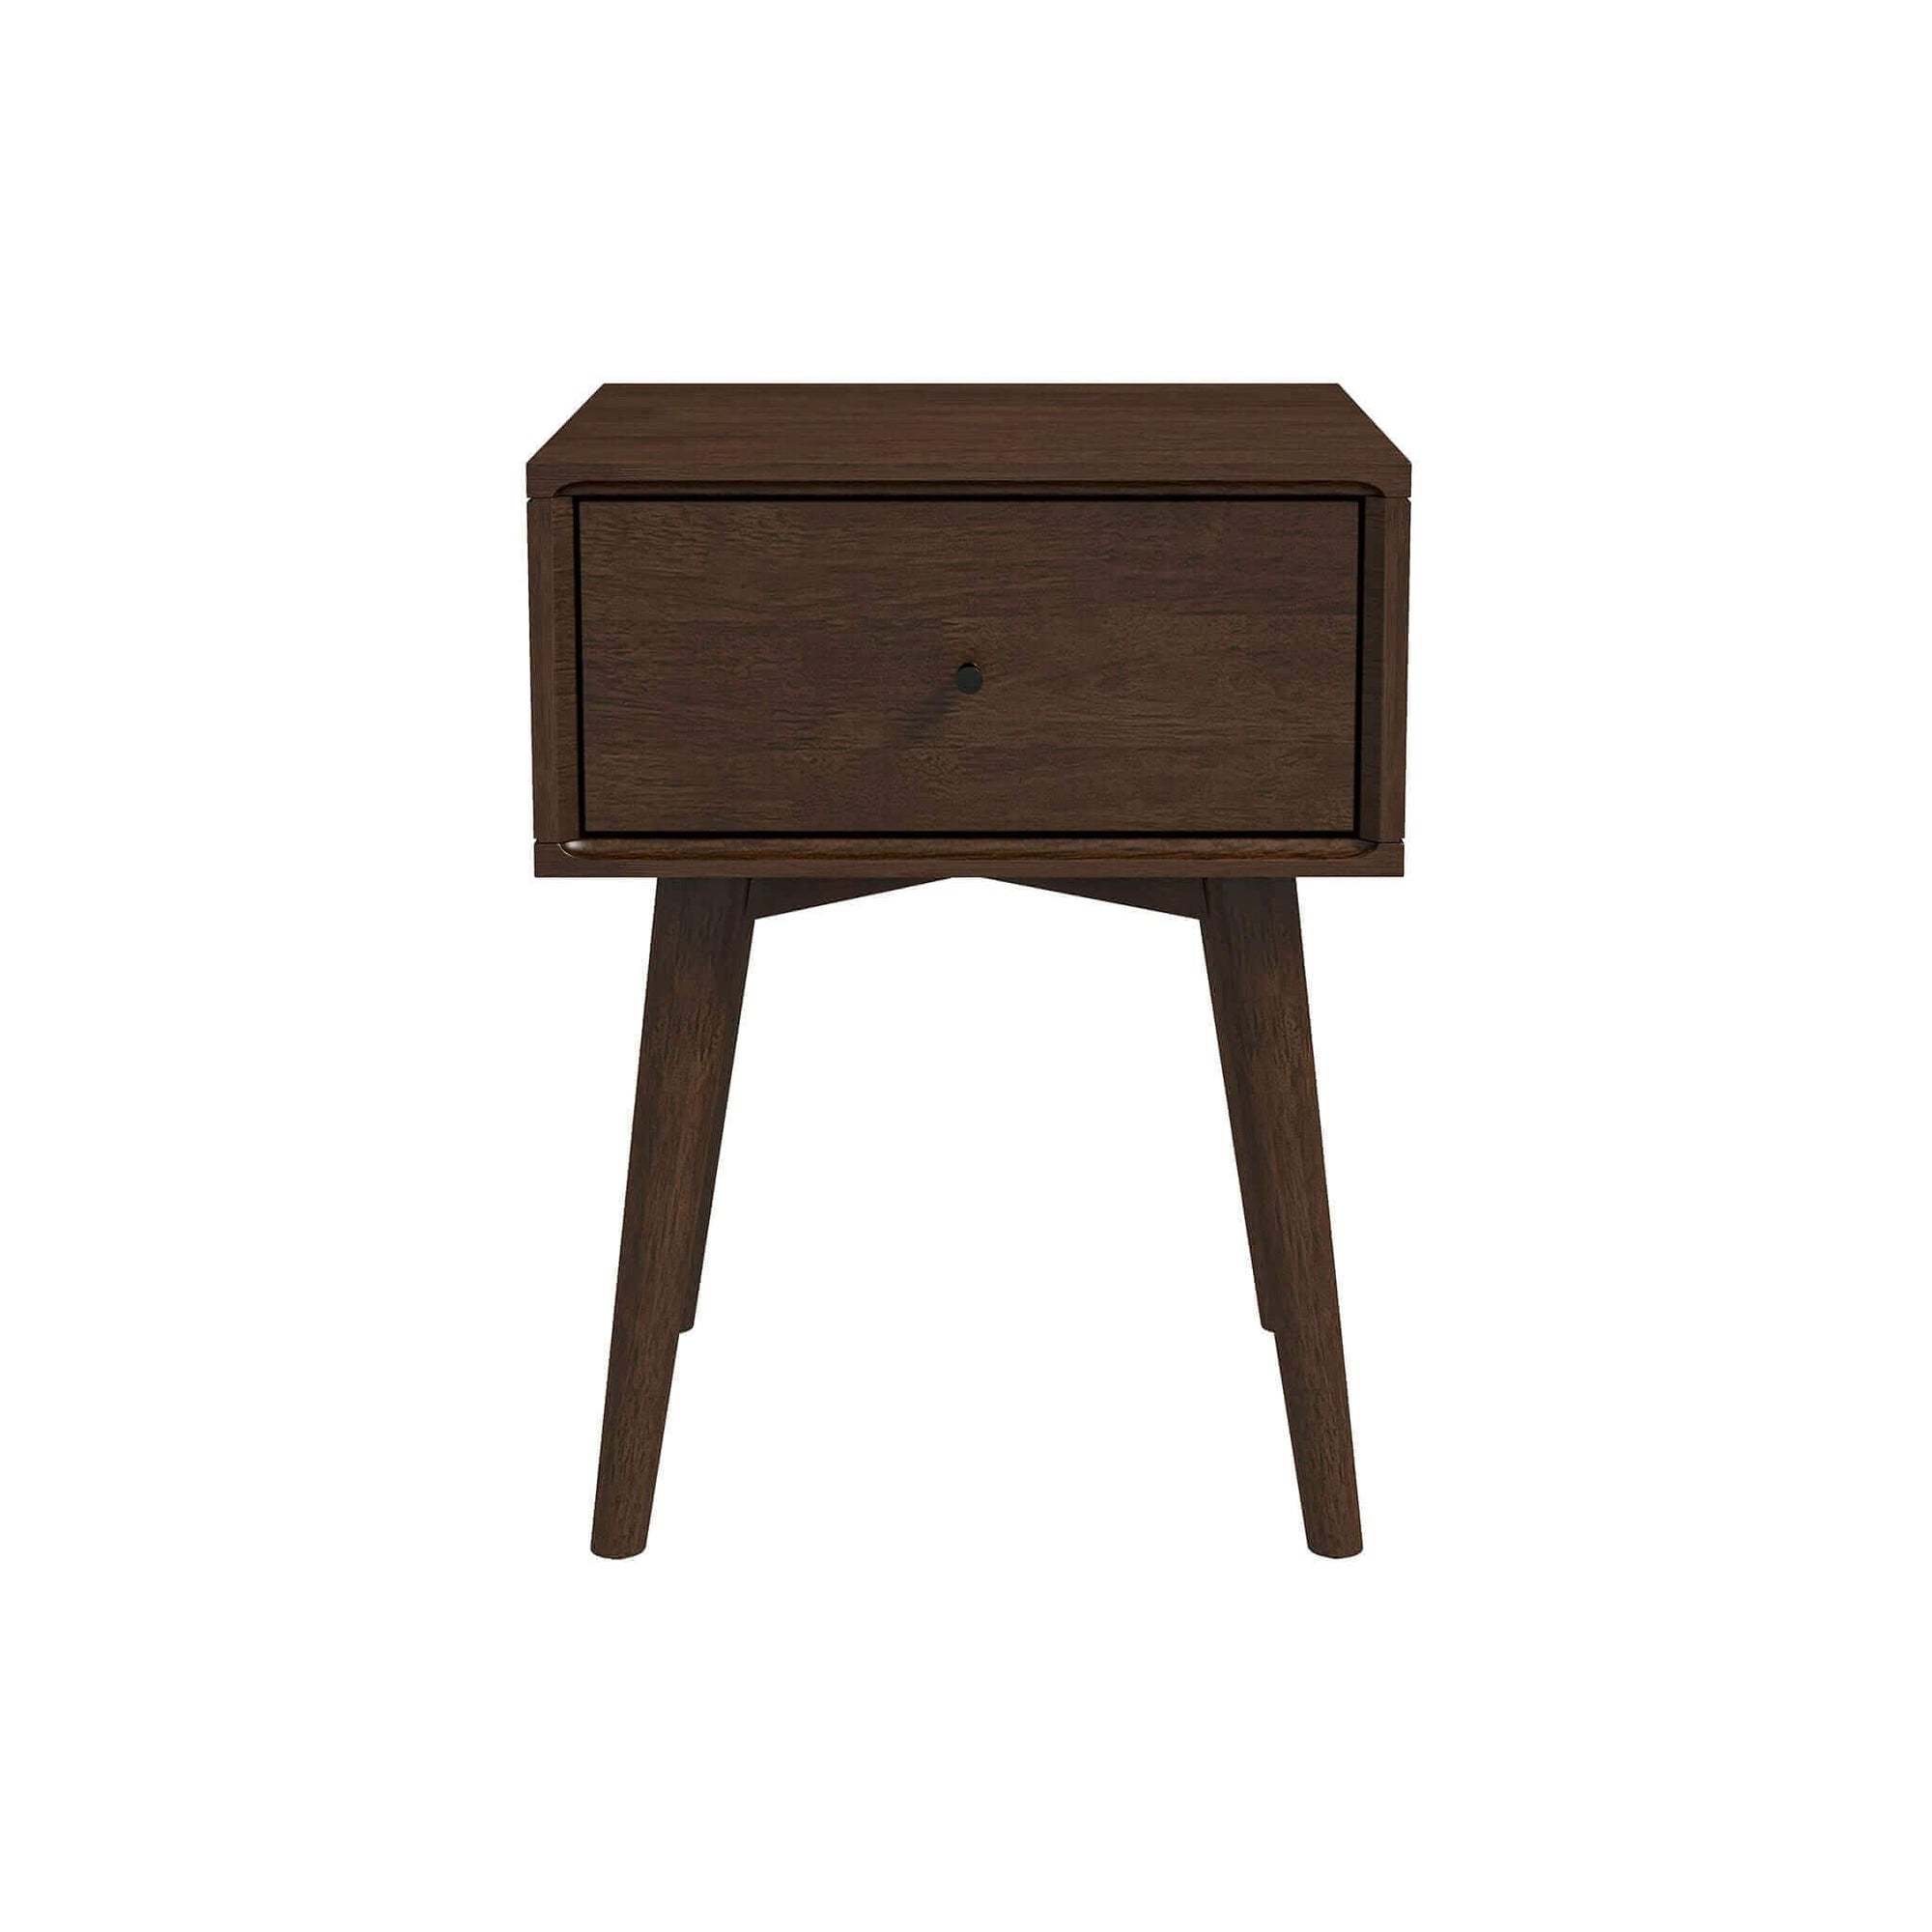 Ashcroft Imports Avery  Solid Wood Night Stand 1 Drawer